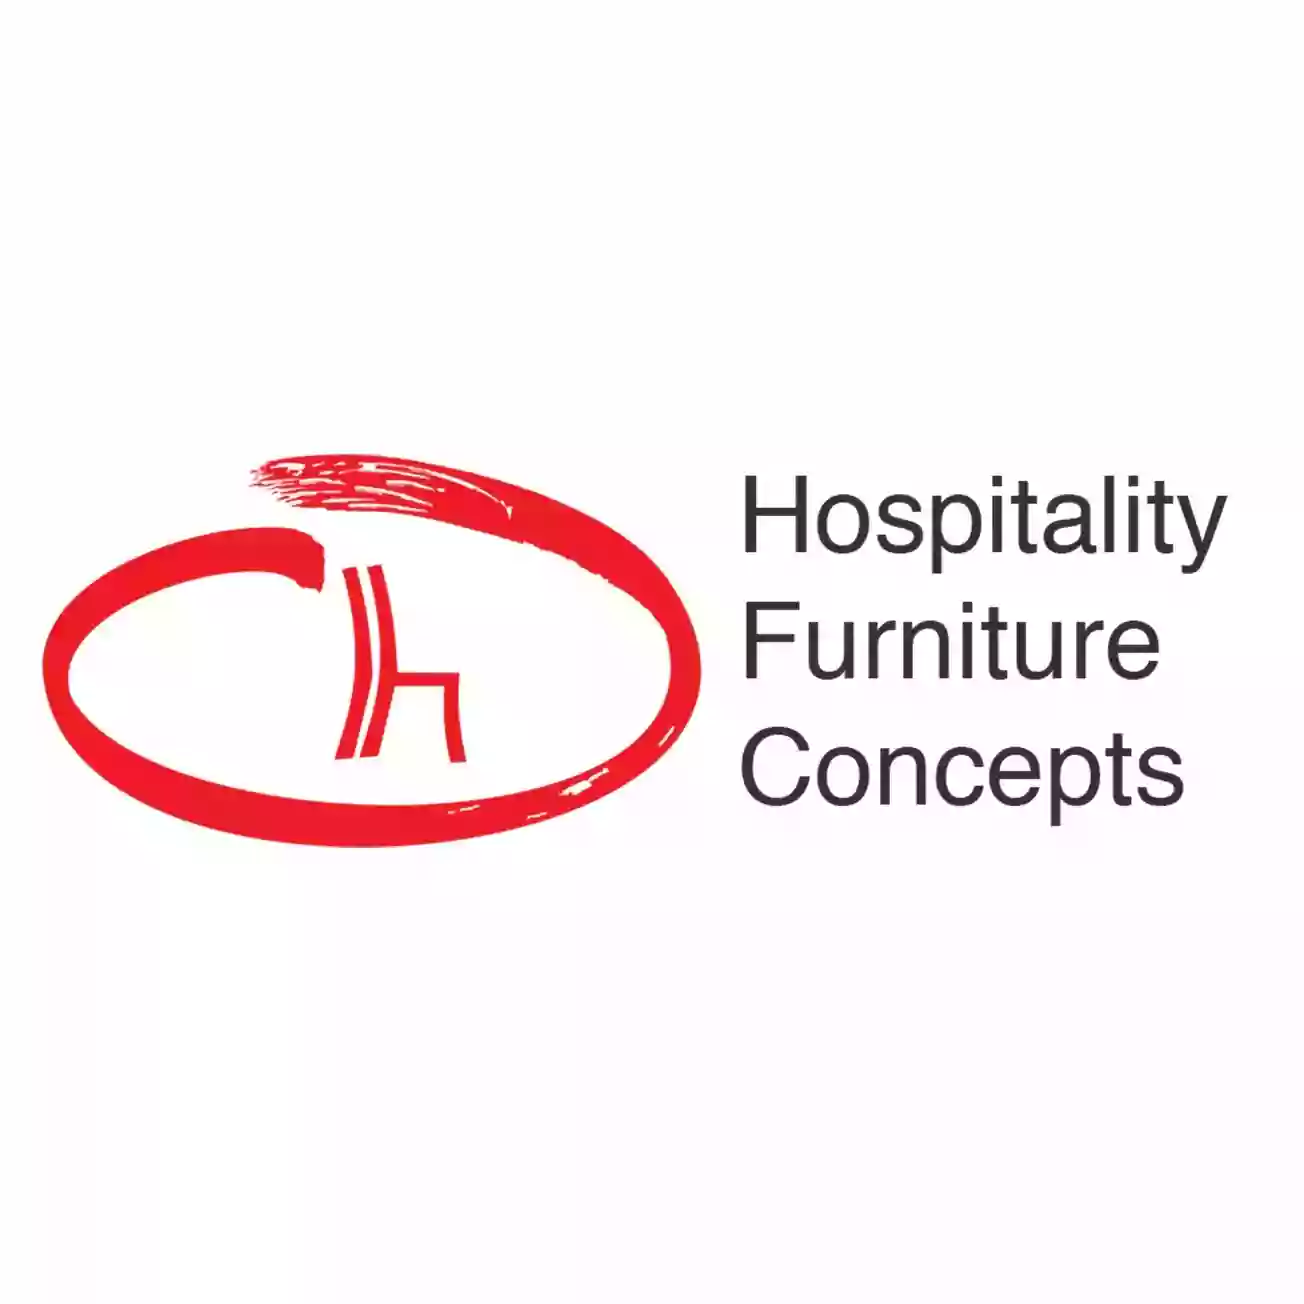 Hospitality Furniture concepts